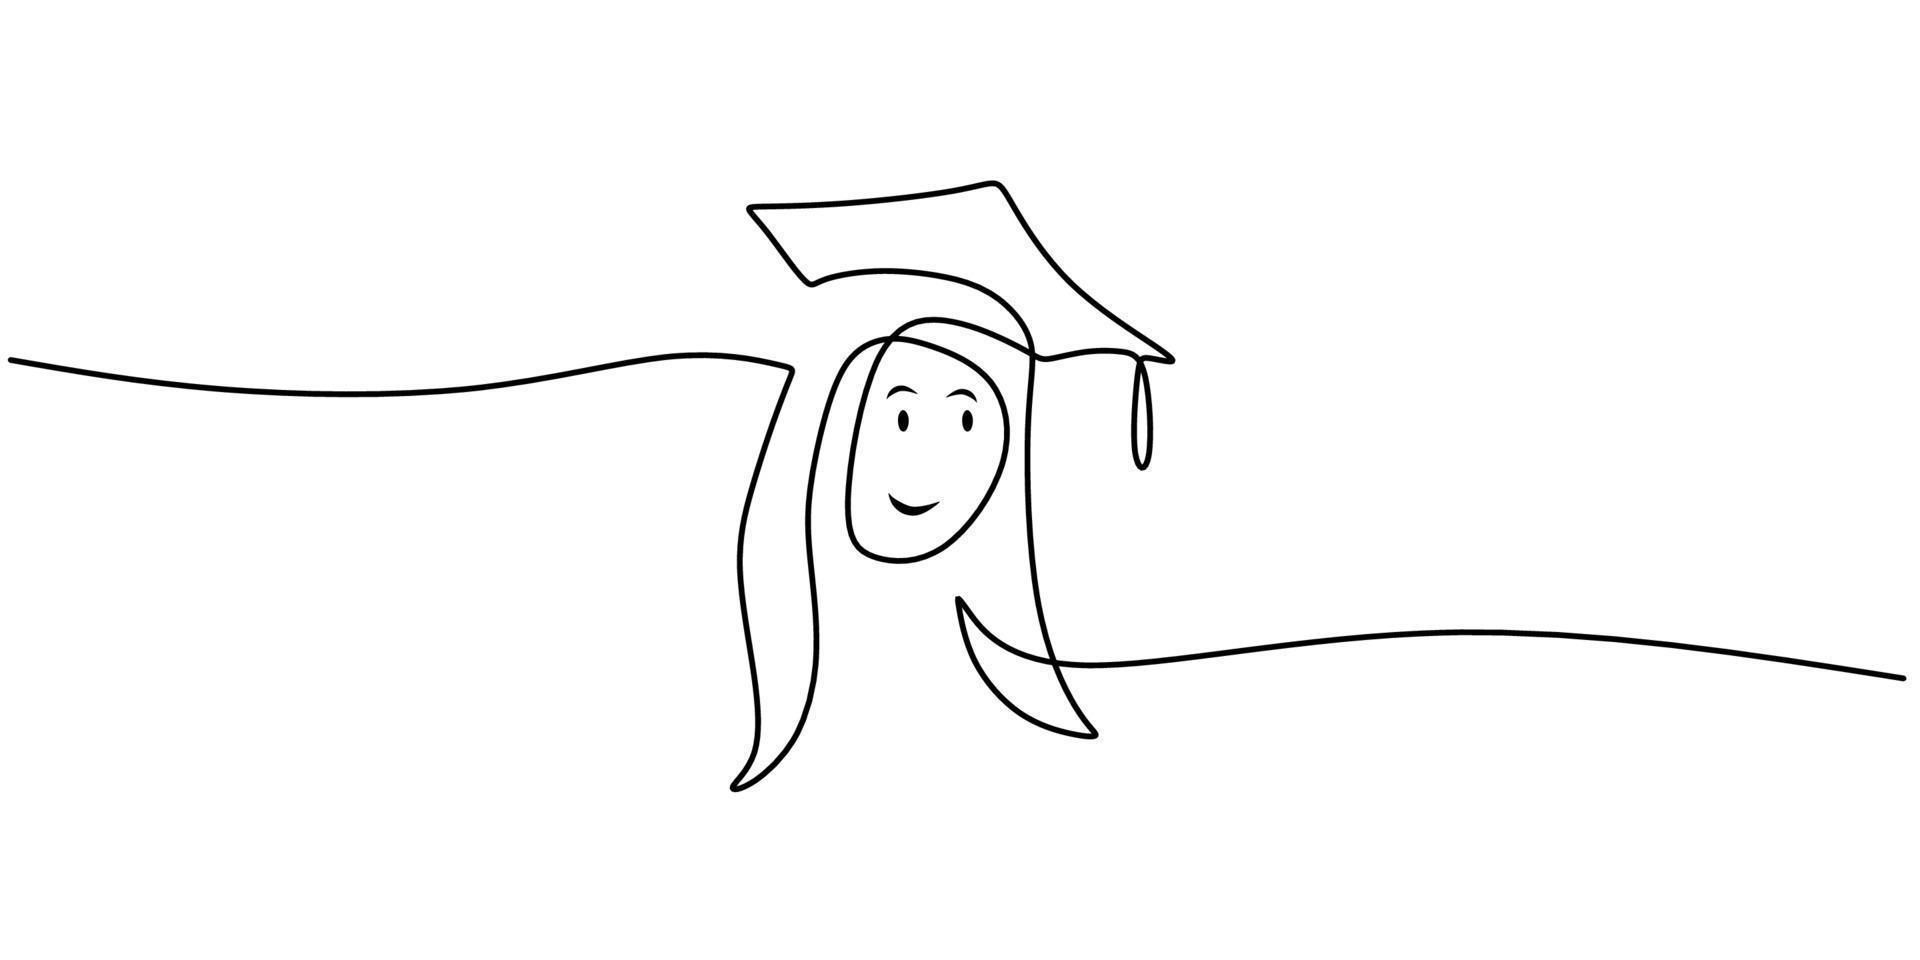 Continuous one single line of little girl using graduation hat vector